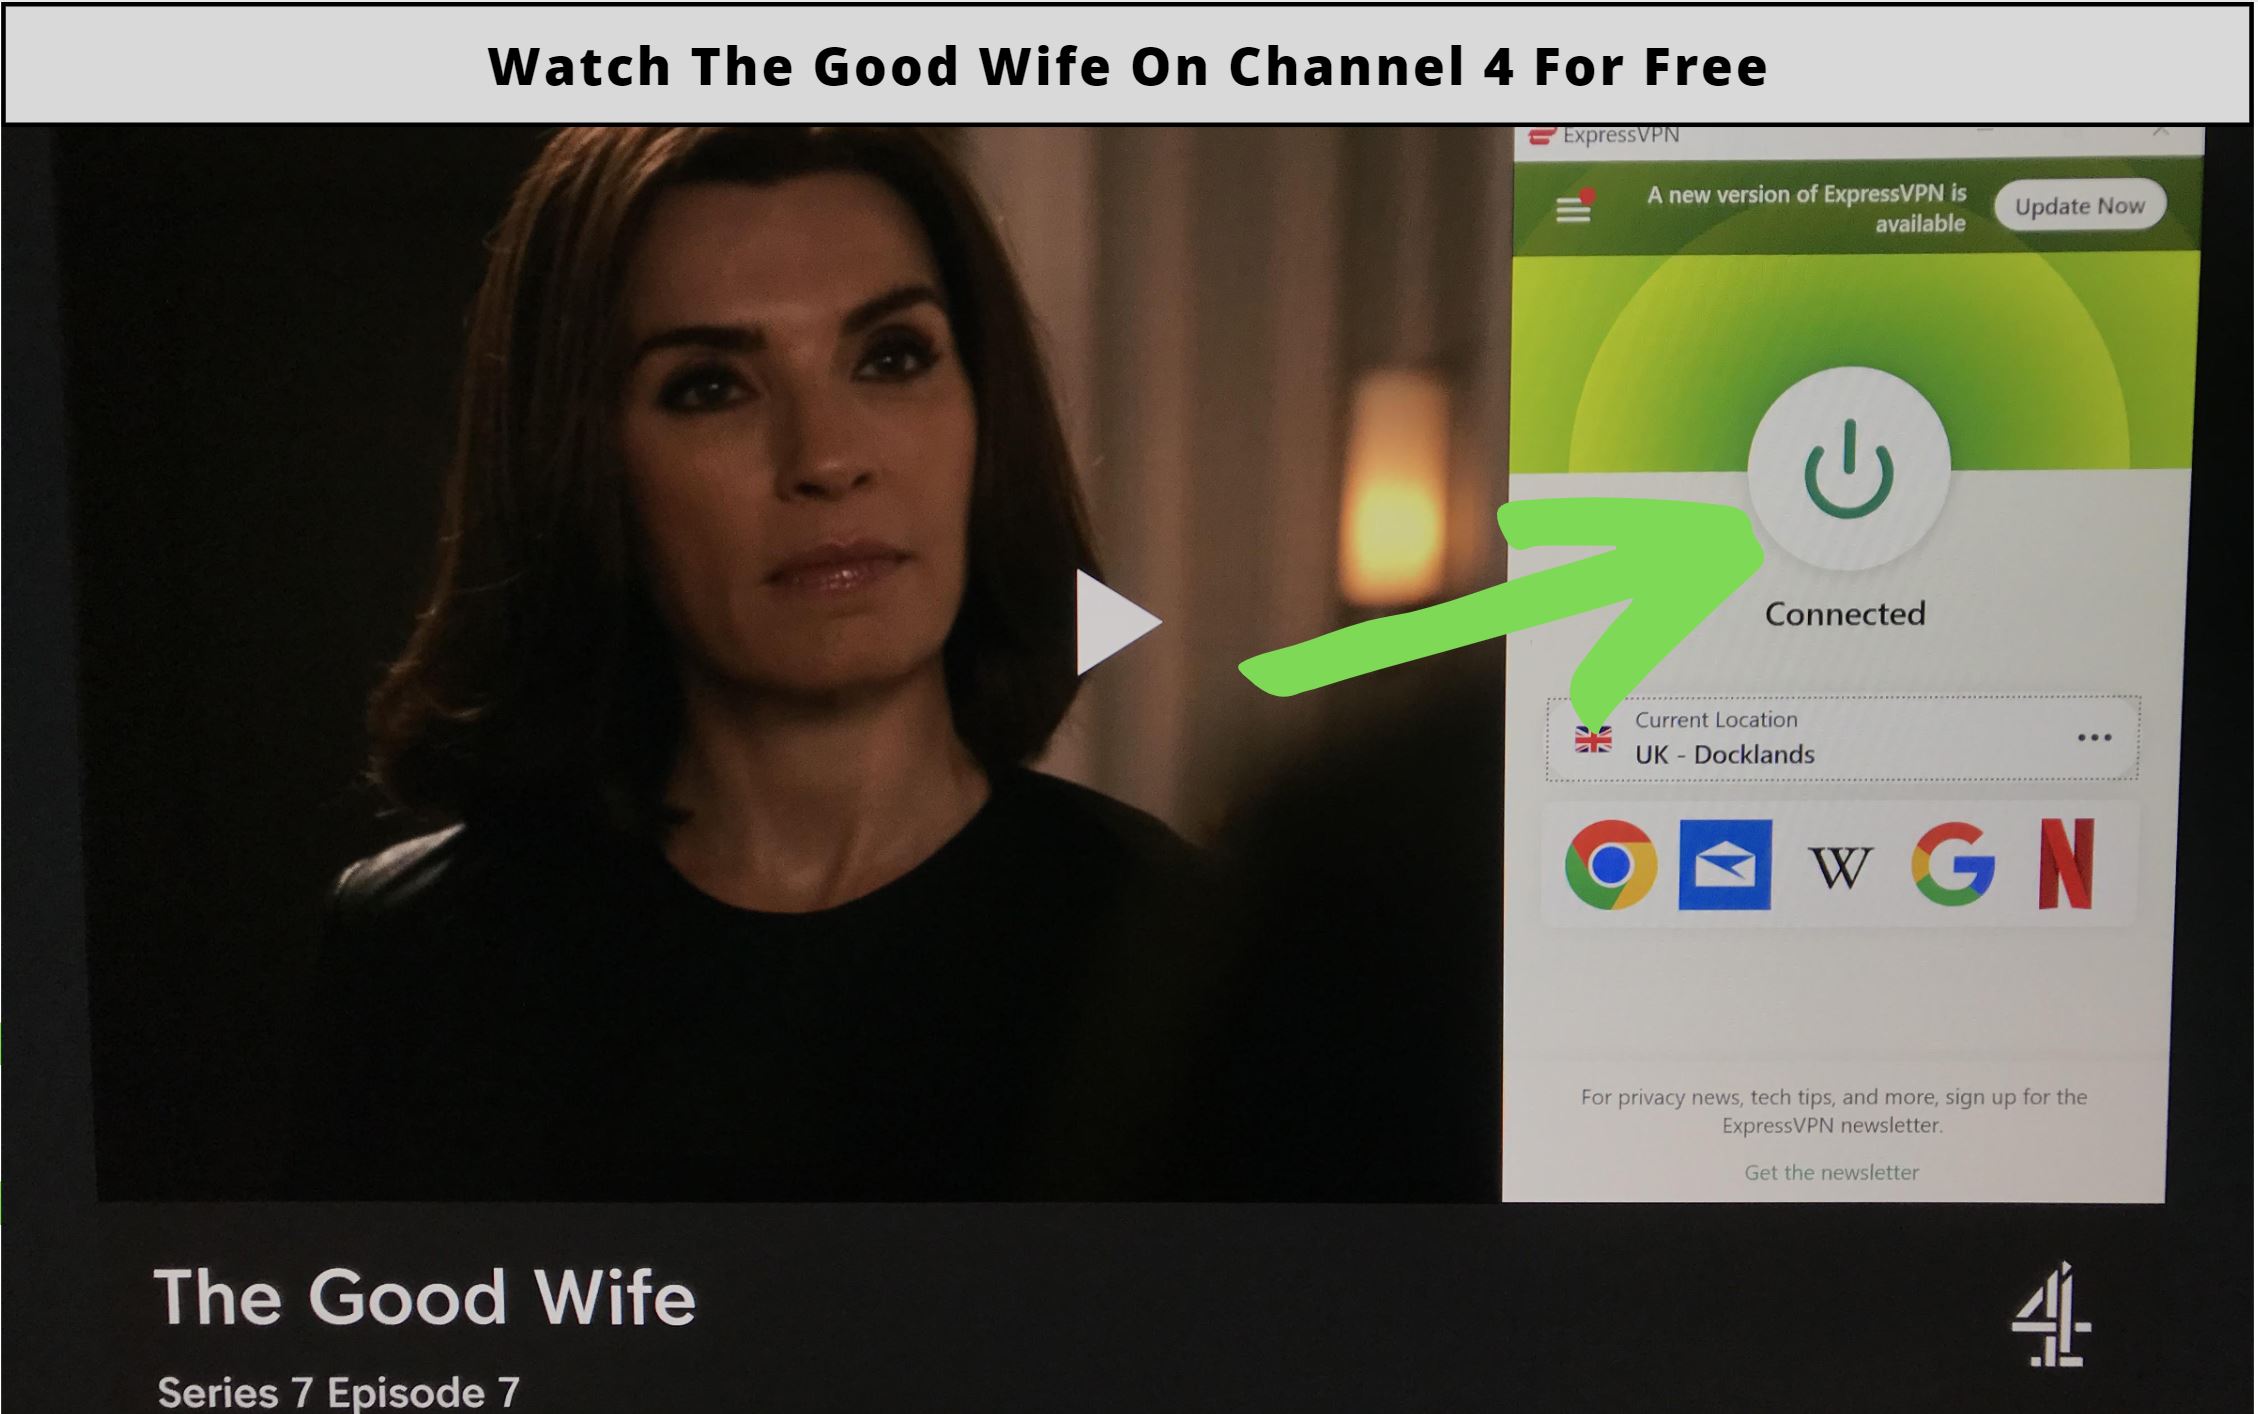 Watch The Good Wife on Channel 4